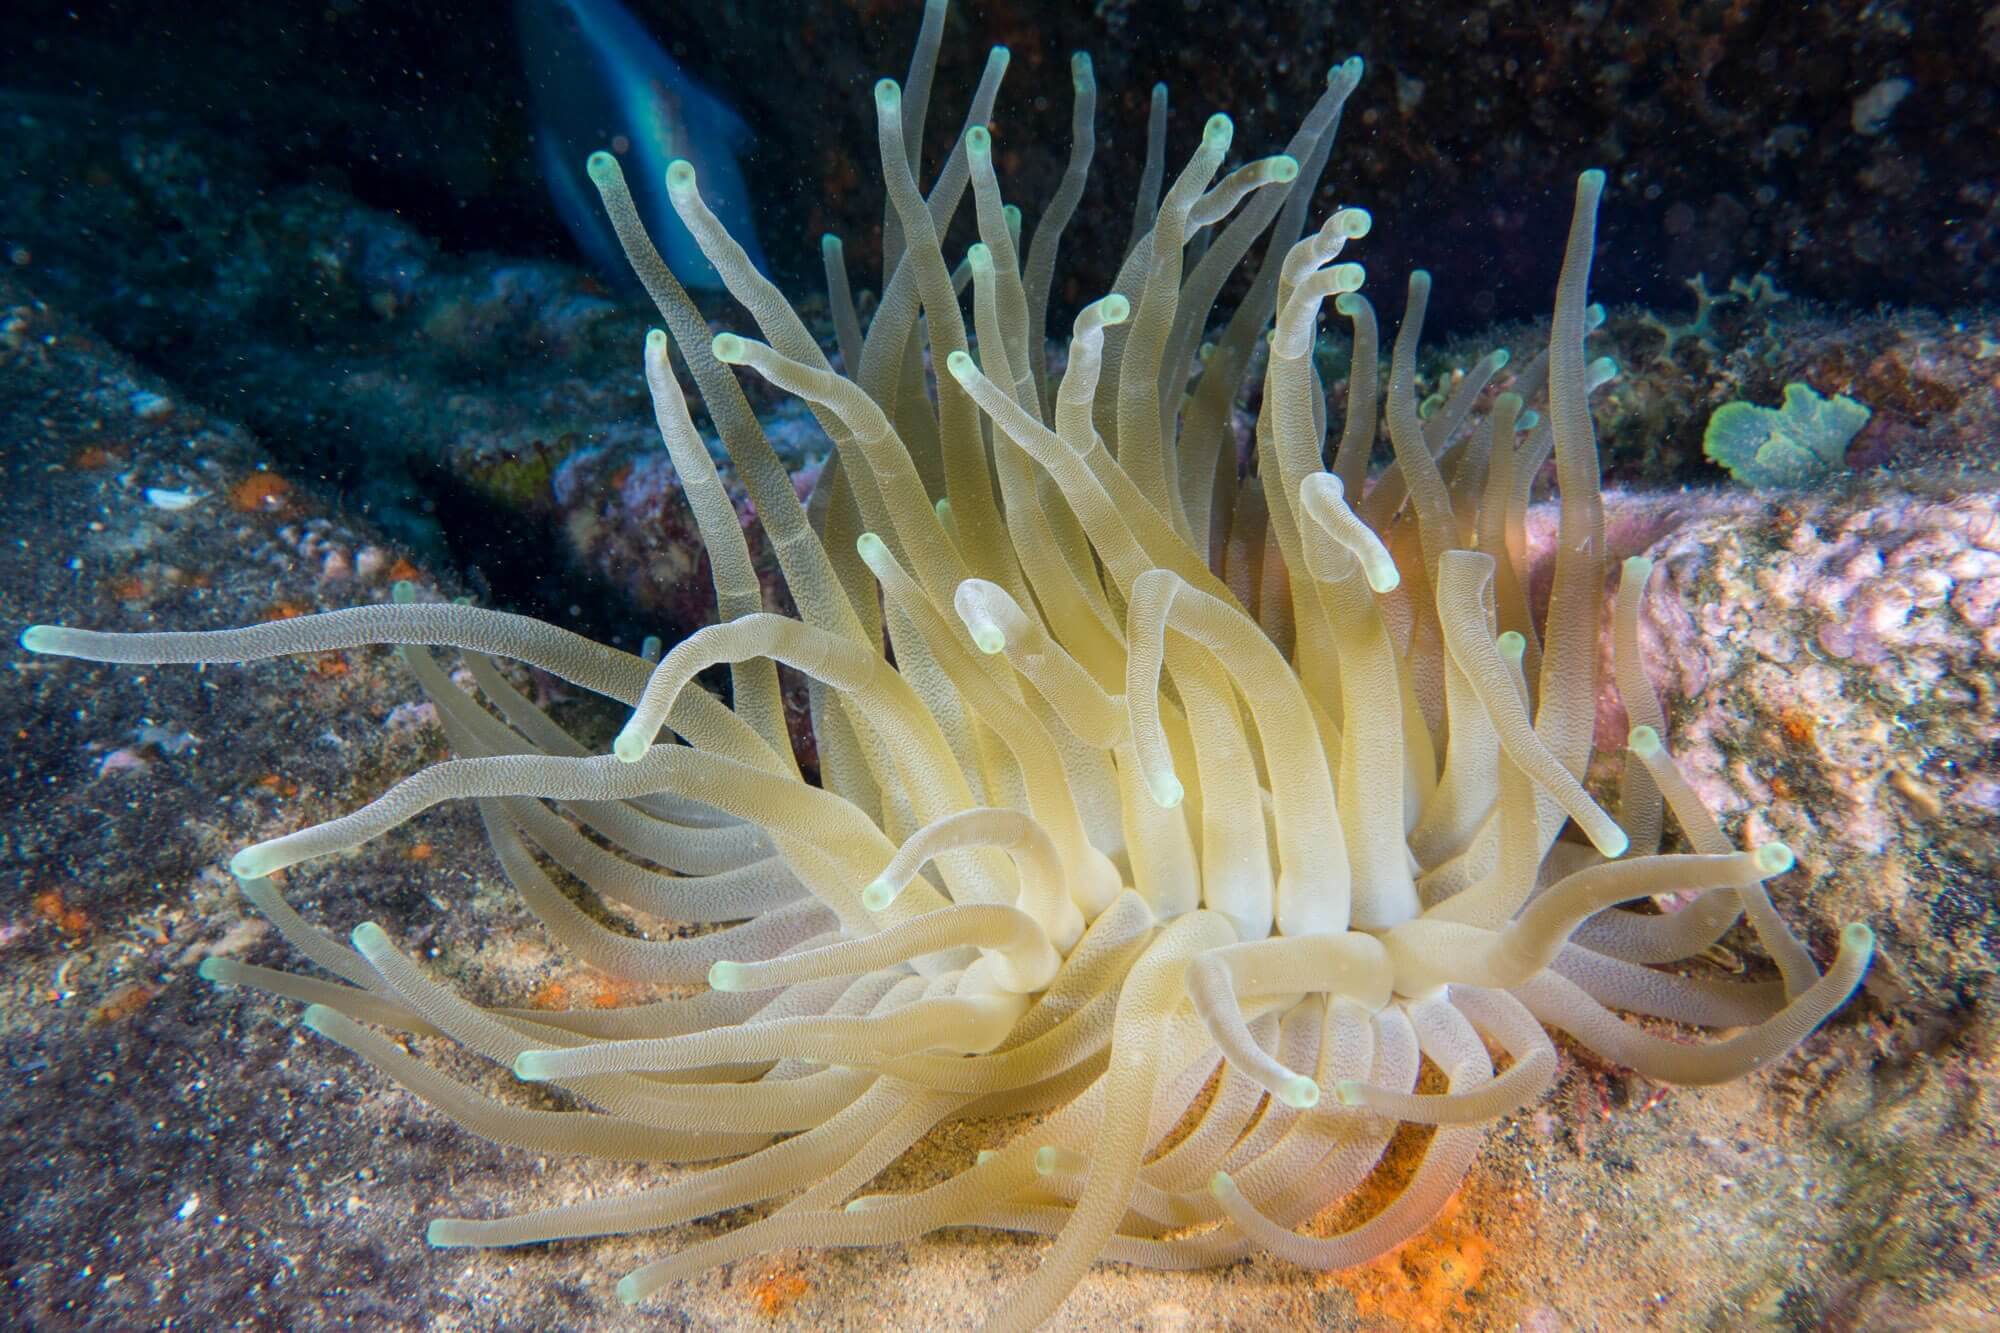 A giant caribbean sea anemone at the Corinthian dive site in St. Kitts